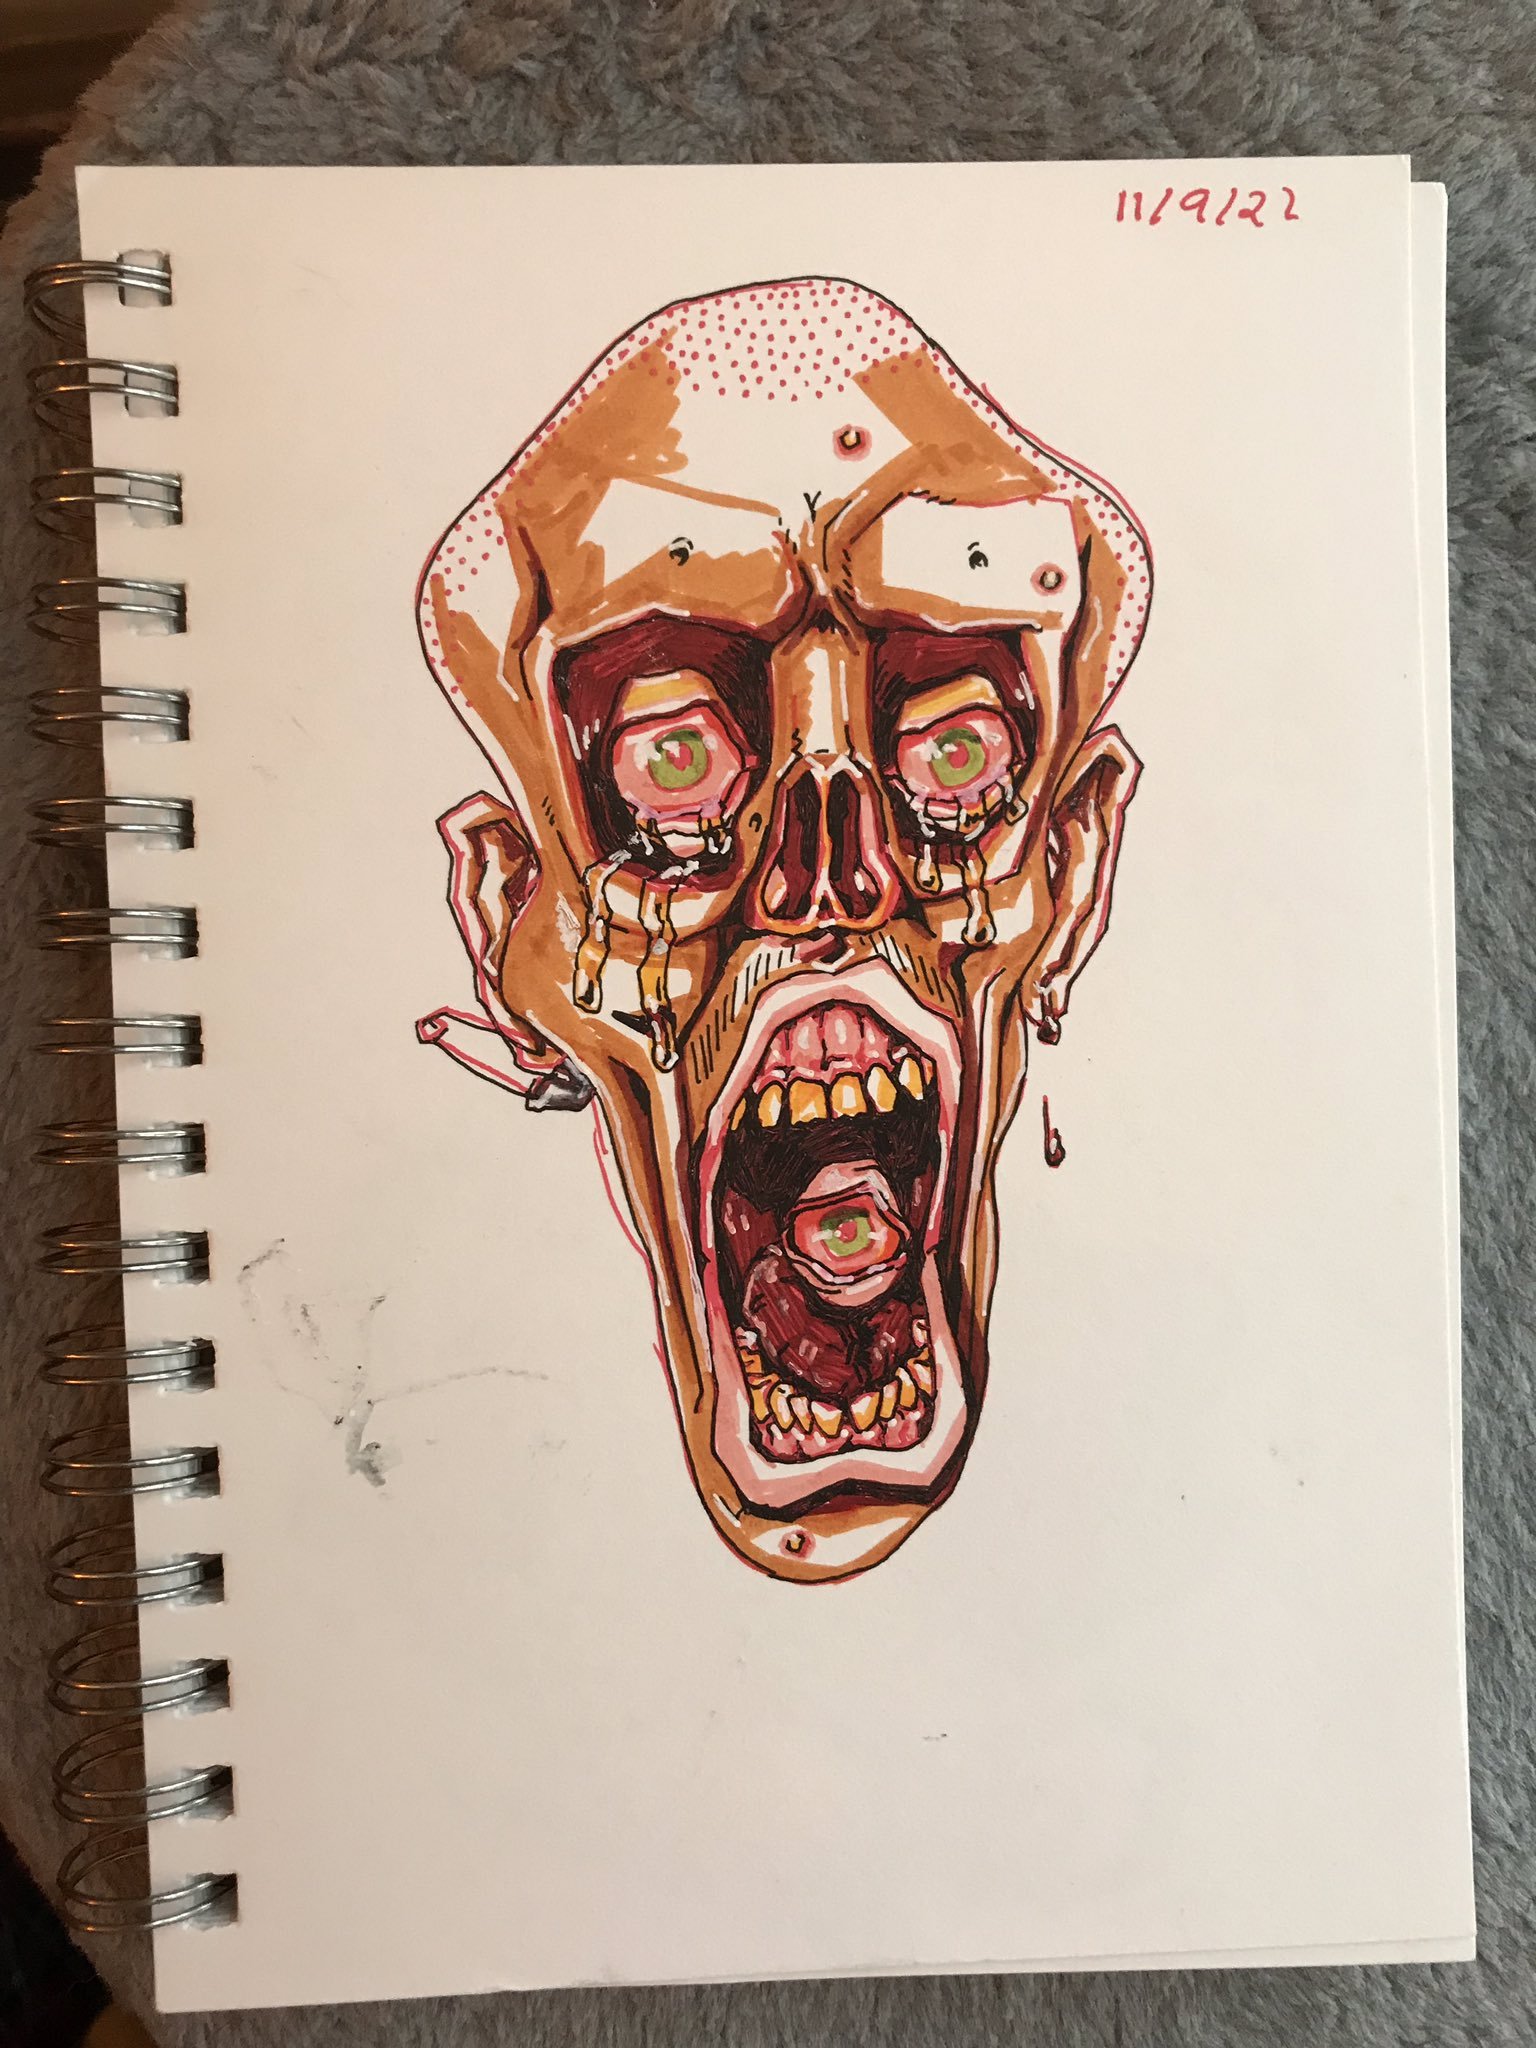 Photo of a sketchbook page showing a skeletal nose-less man with an eyeball in his mouth and a pierced ear crying